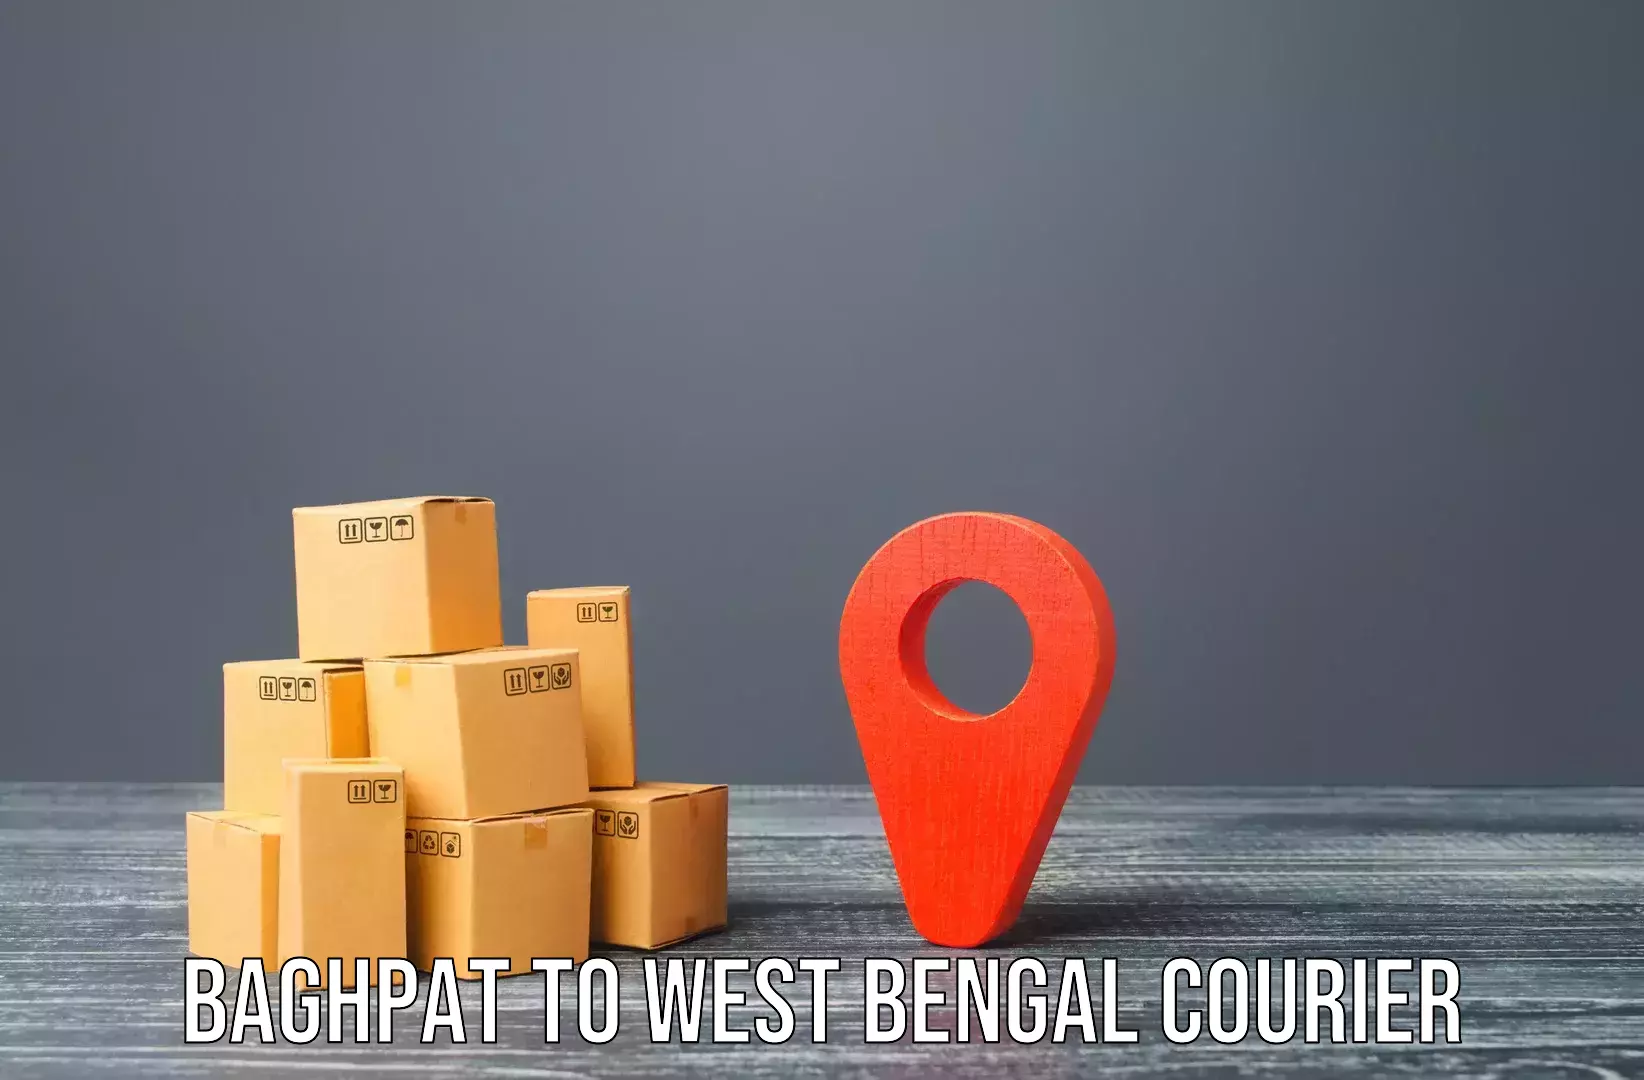 Furniture delivery service Baghpat to Chhatna